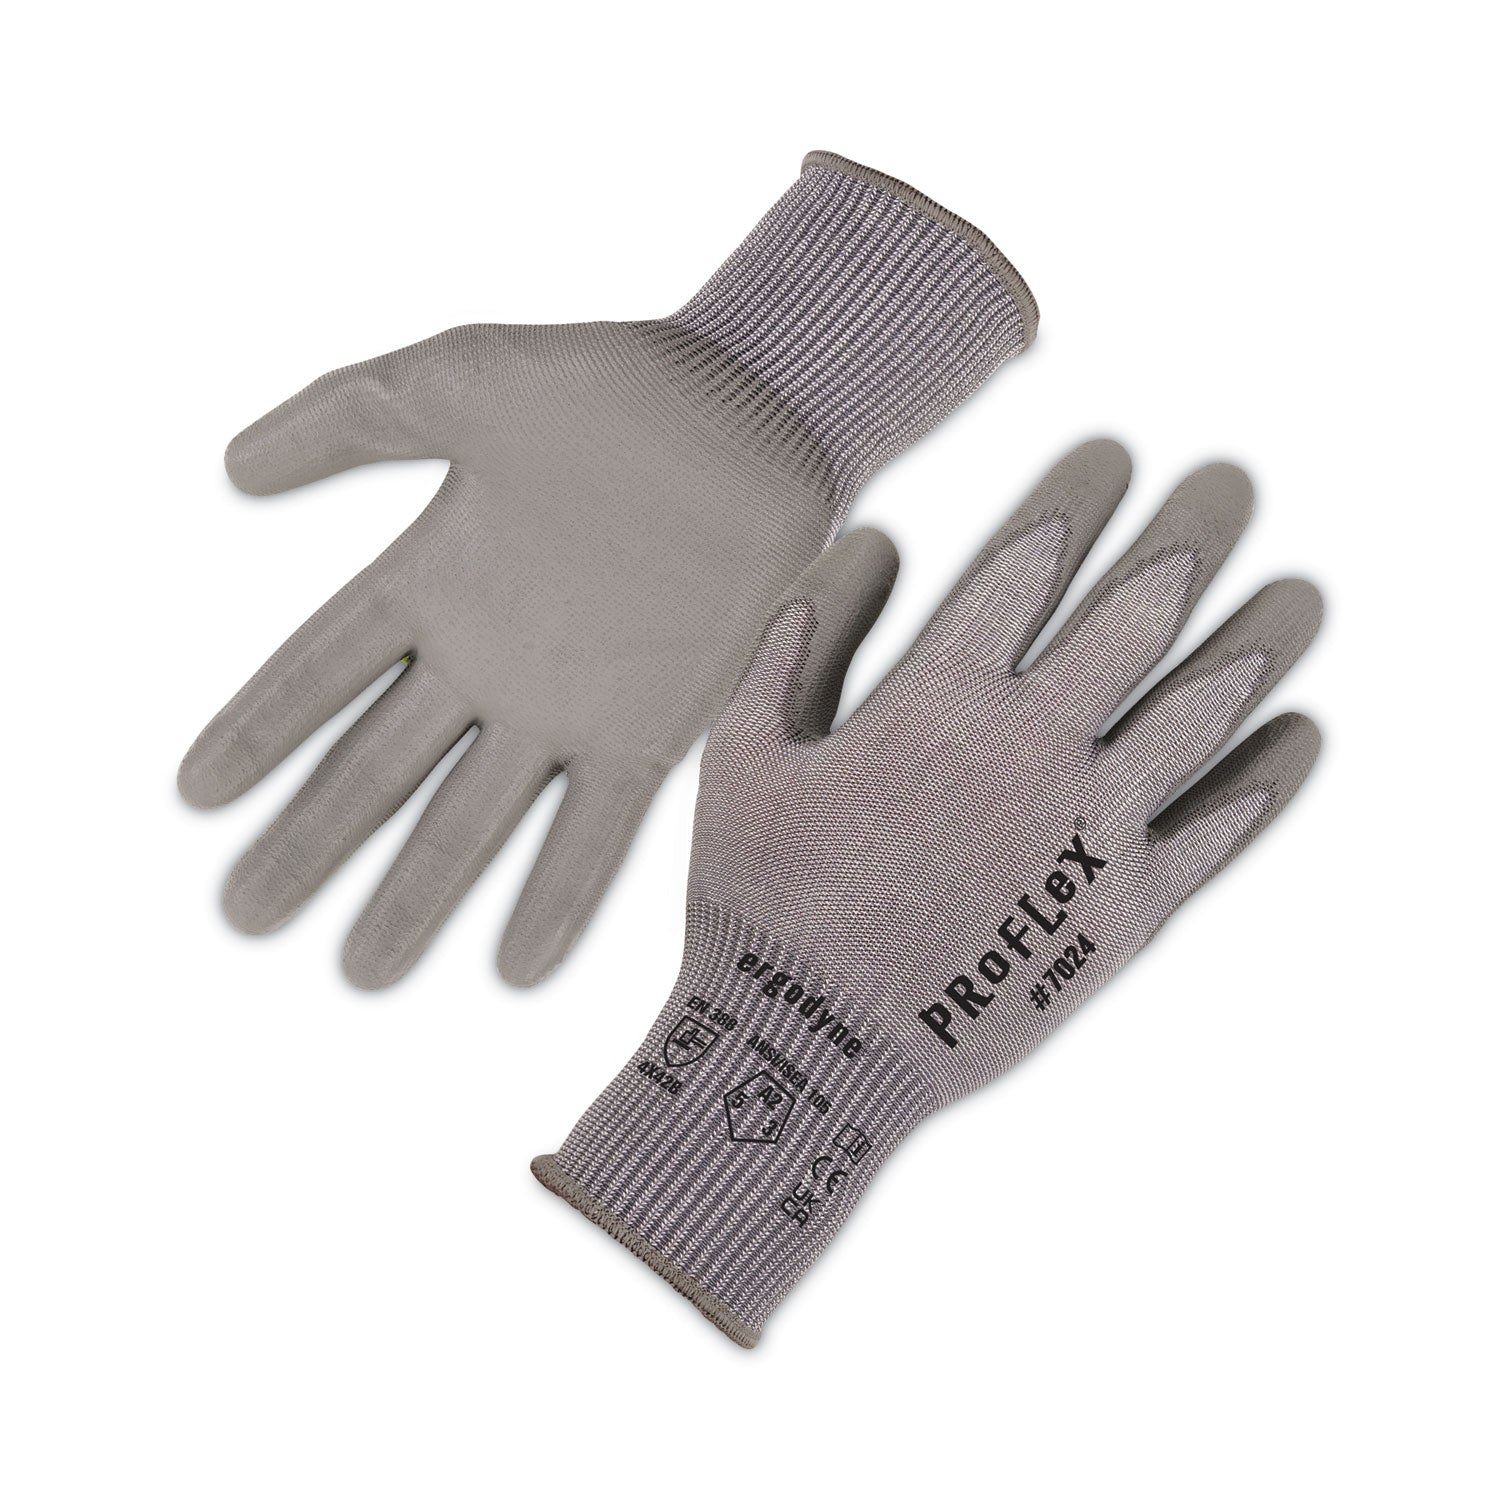 proflex-7024-ansi-a2-pu-coated-cr-gloves-gray-large-pair-ships-in-1-3-business-days_ego10404 - 1